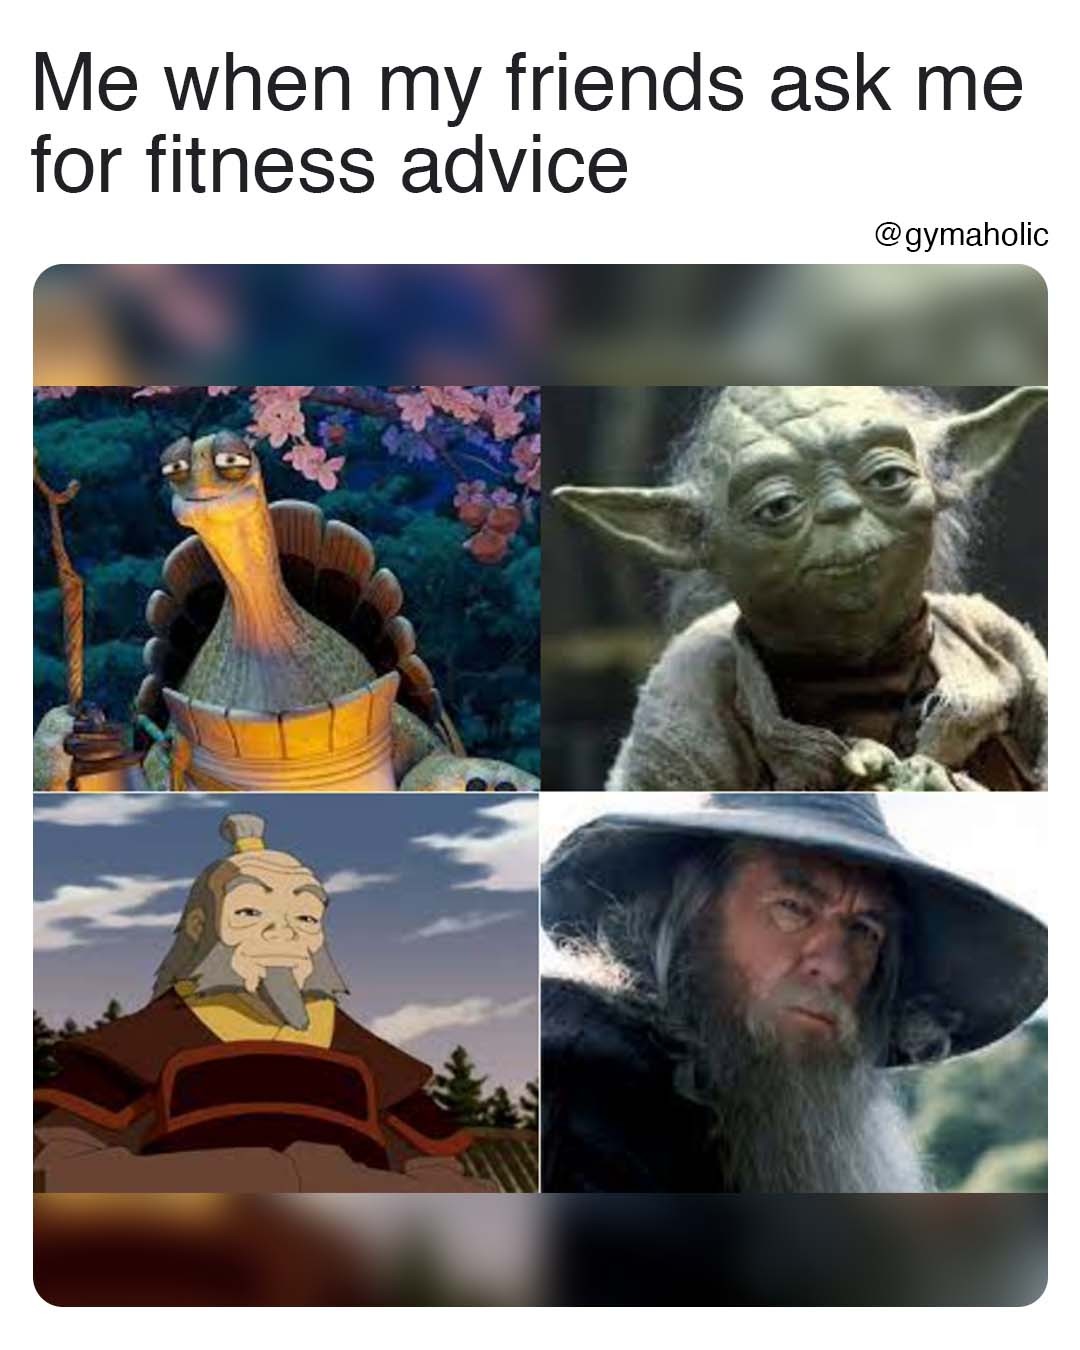 Me when my friends ask me for fitness advice